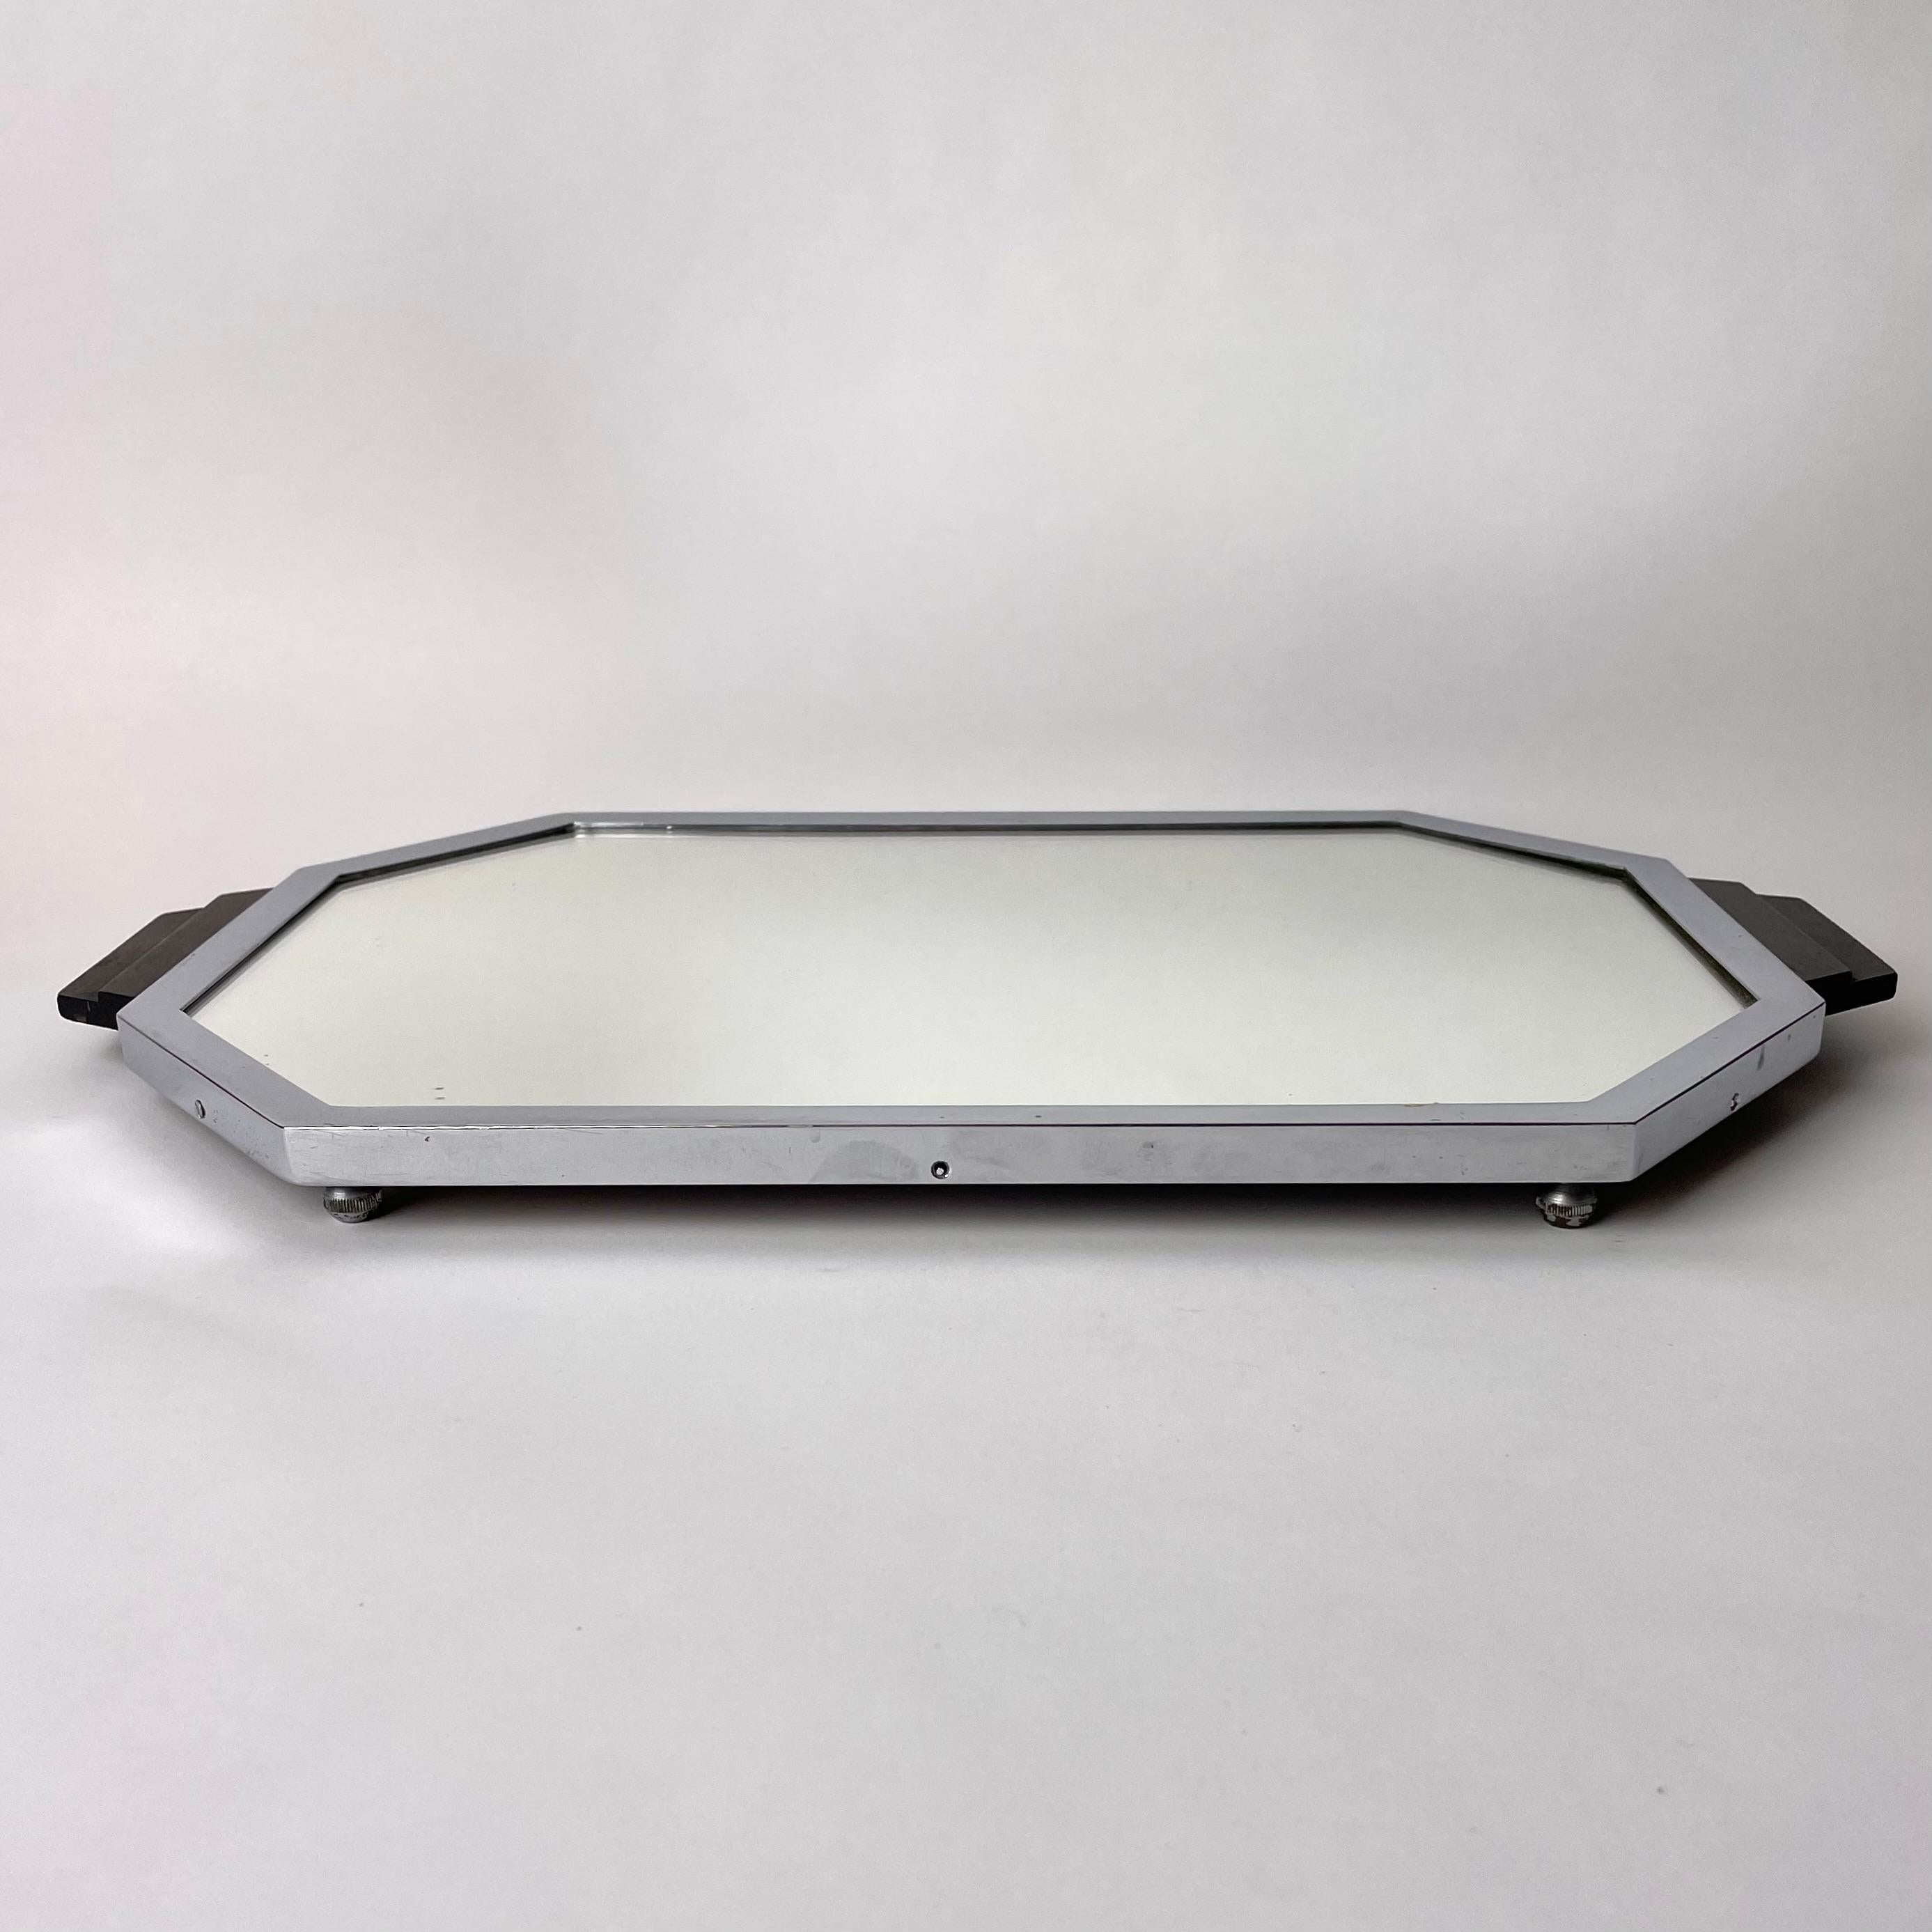 Elegant Art Deco Tray in Chrome and Blackened Wood with Mirror Glass, 1920s  In Good Condition For Sale In Knivsta, SE